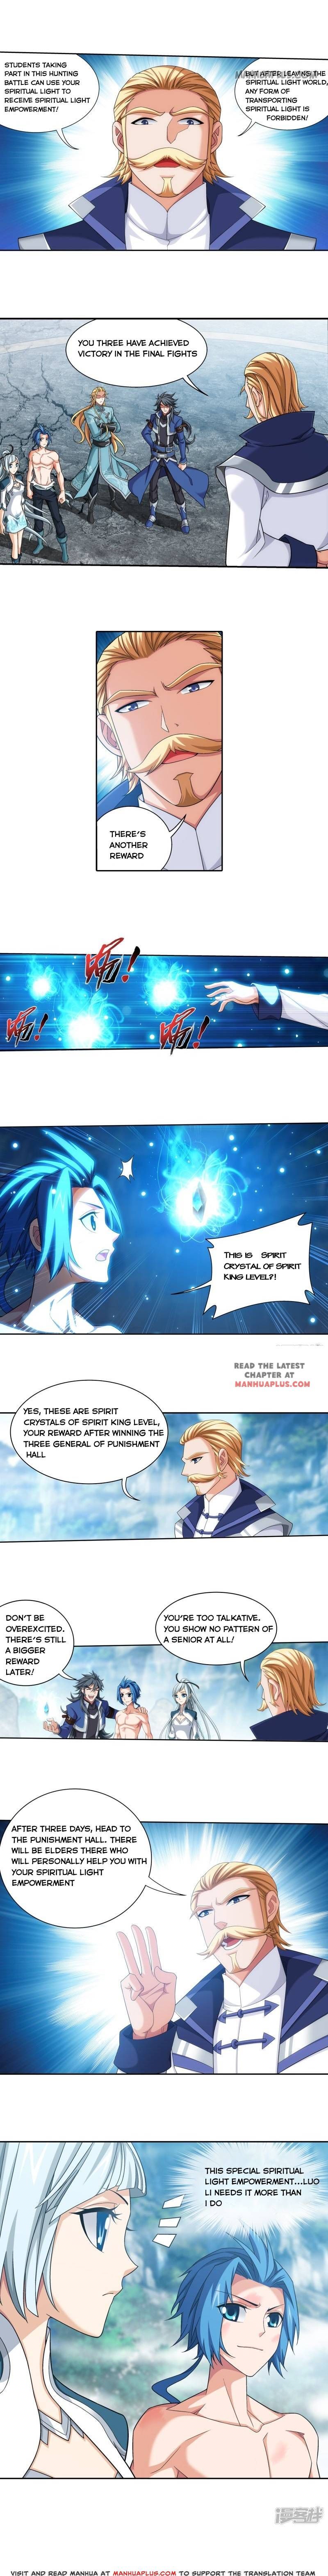 The Great Ruler Chapter 170 page 3